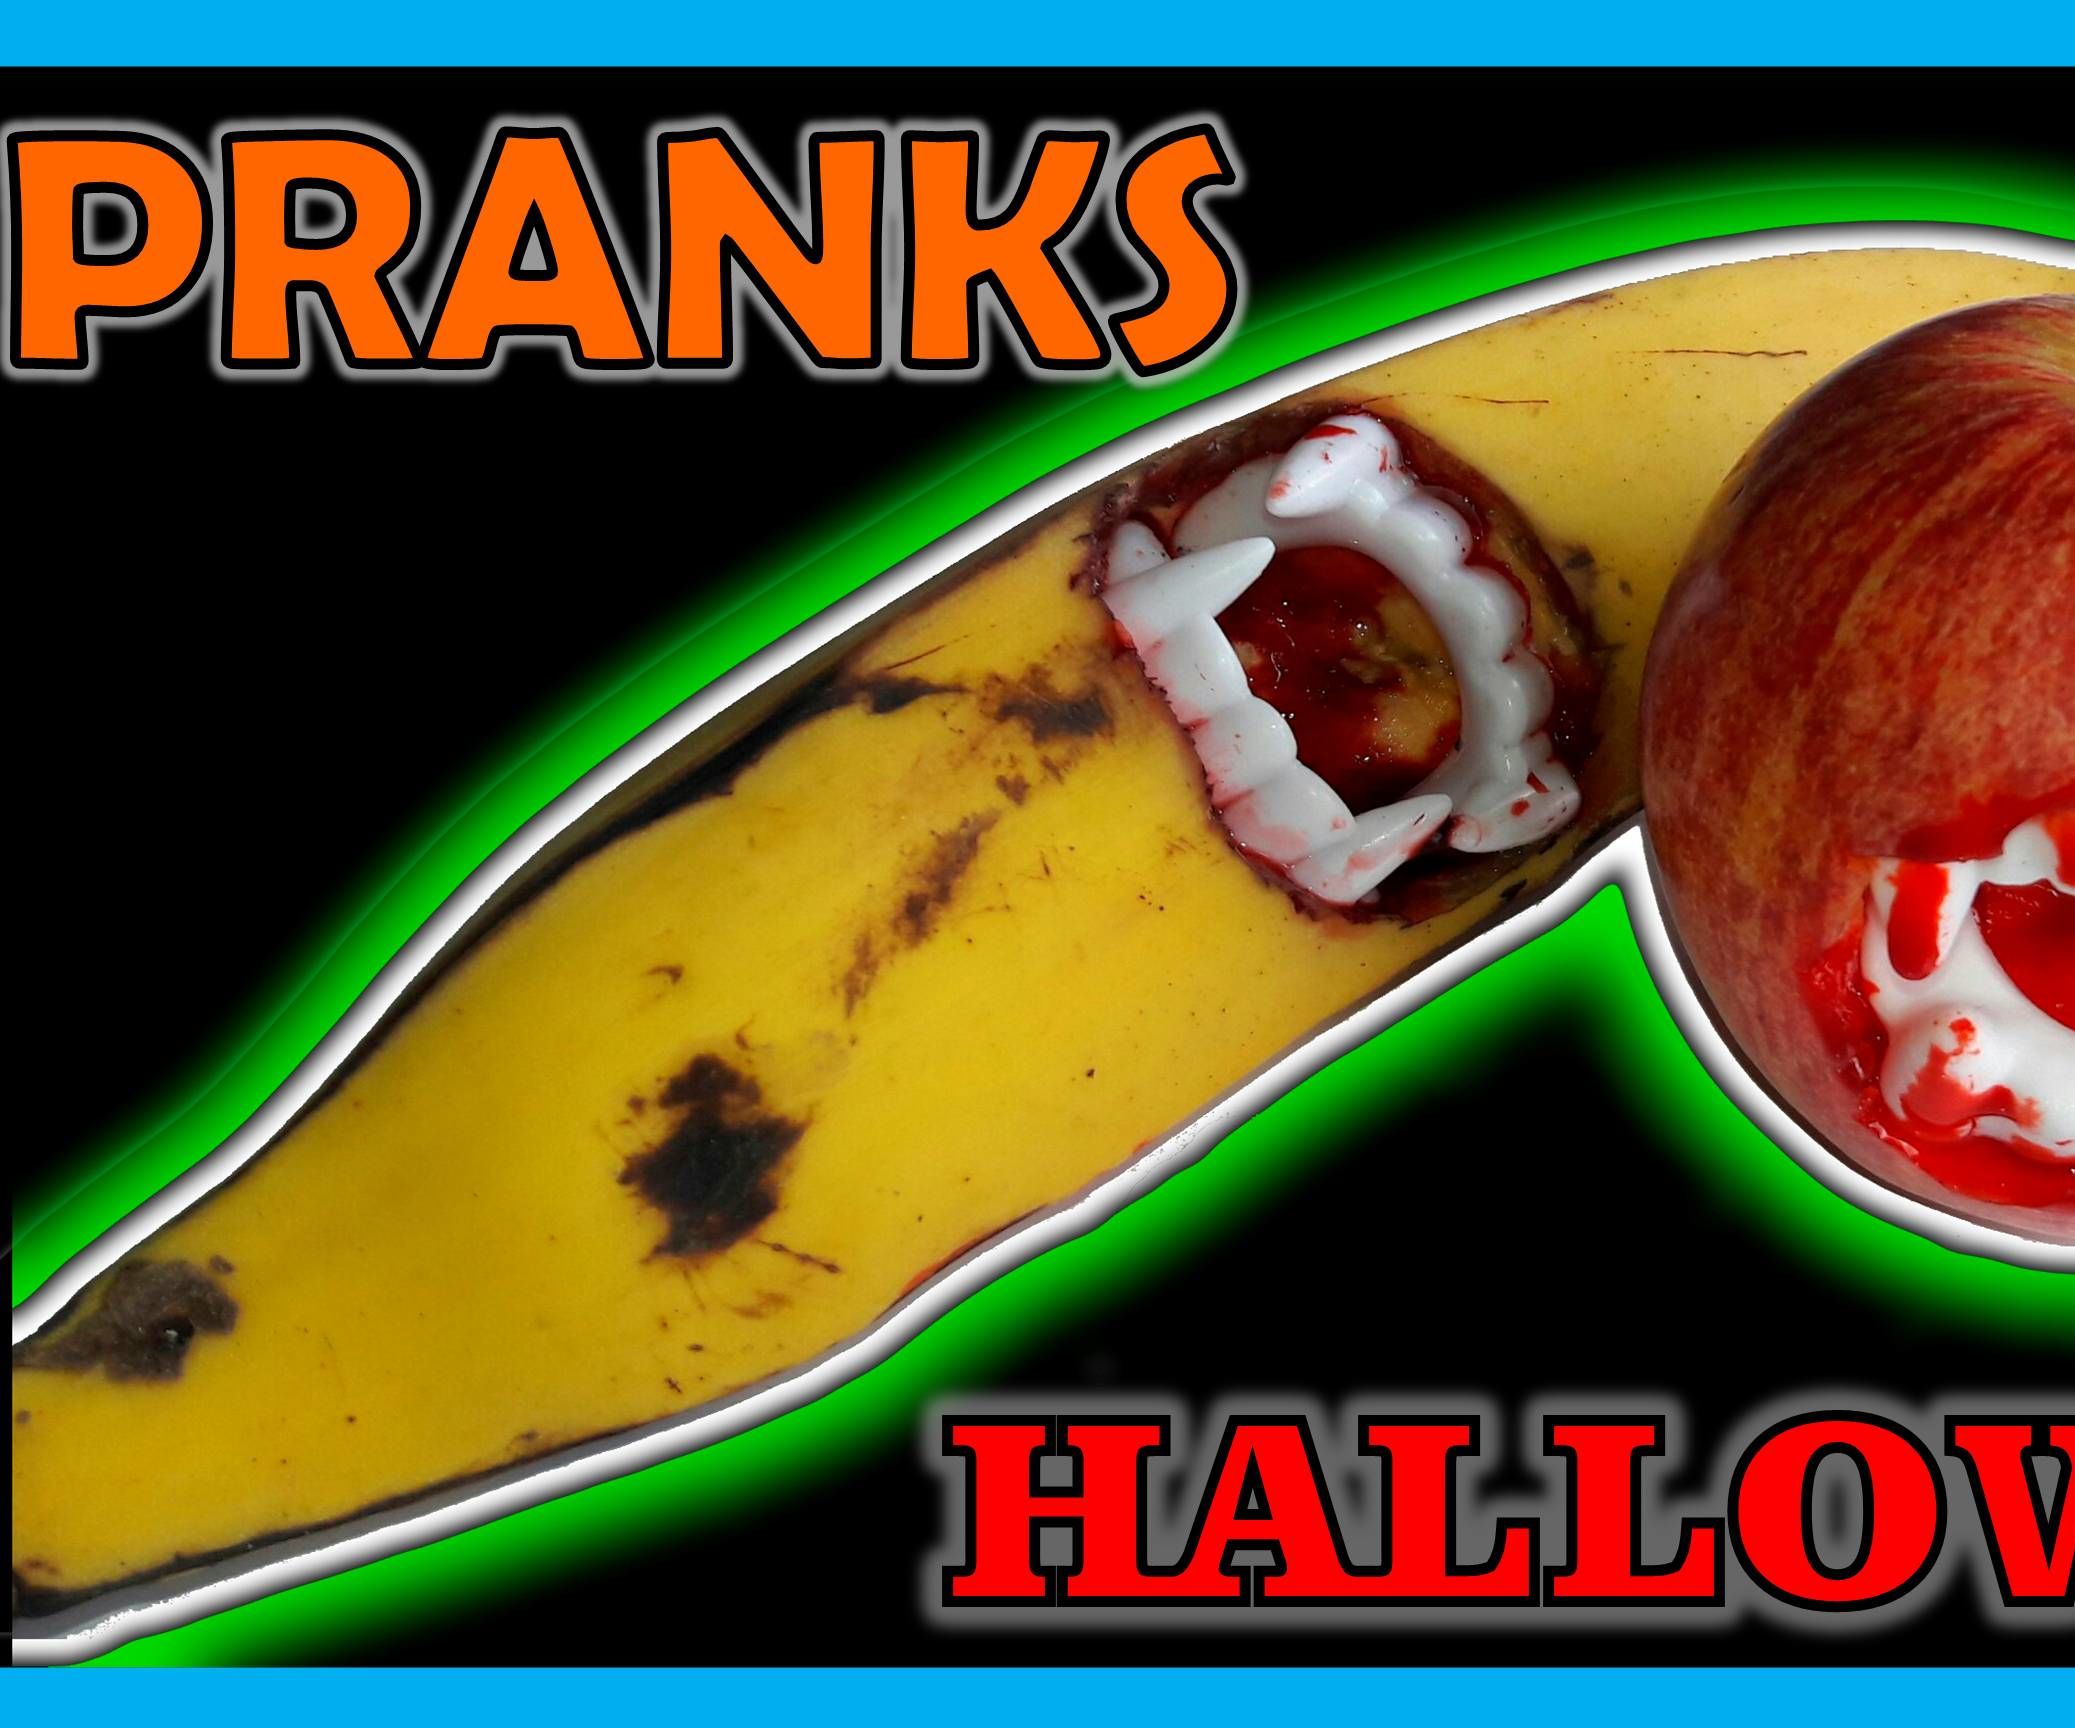 7 PRANKS FOR HALLOWEEN! ✦ Amazing PRANKS to Make Your FRIENDS IN HALLOWEEN! ?